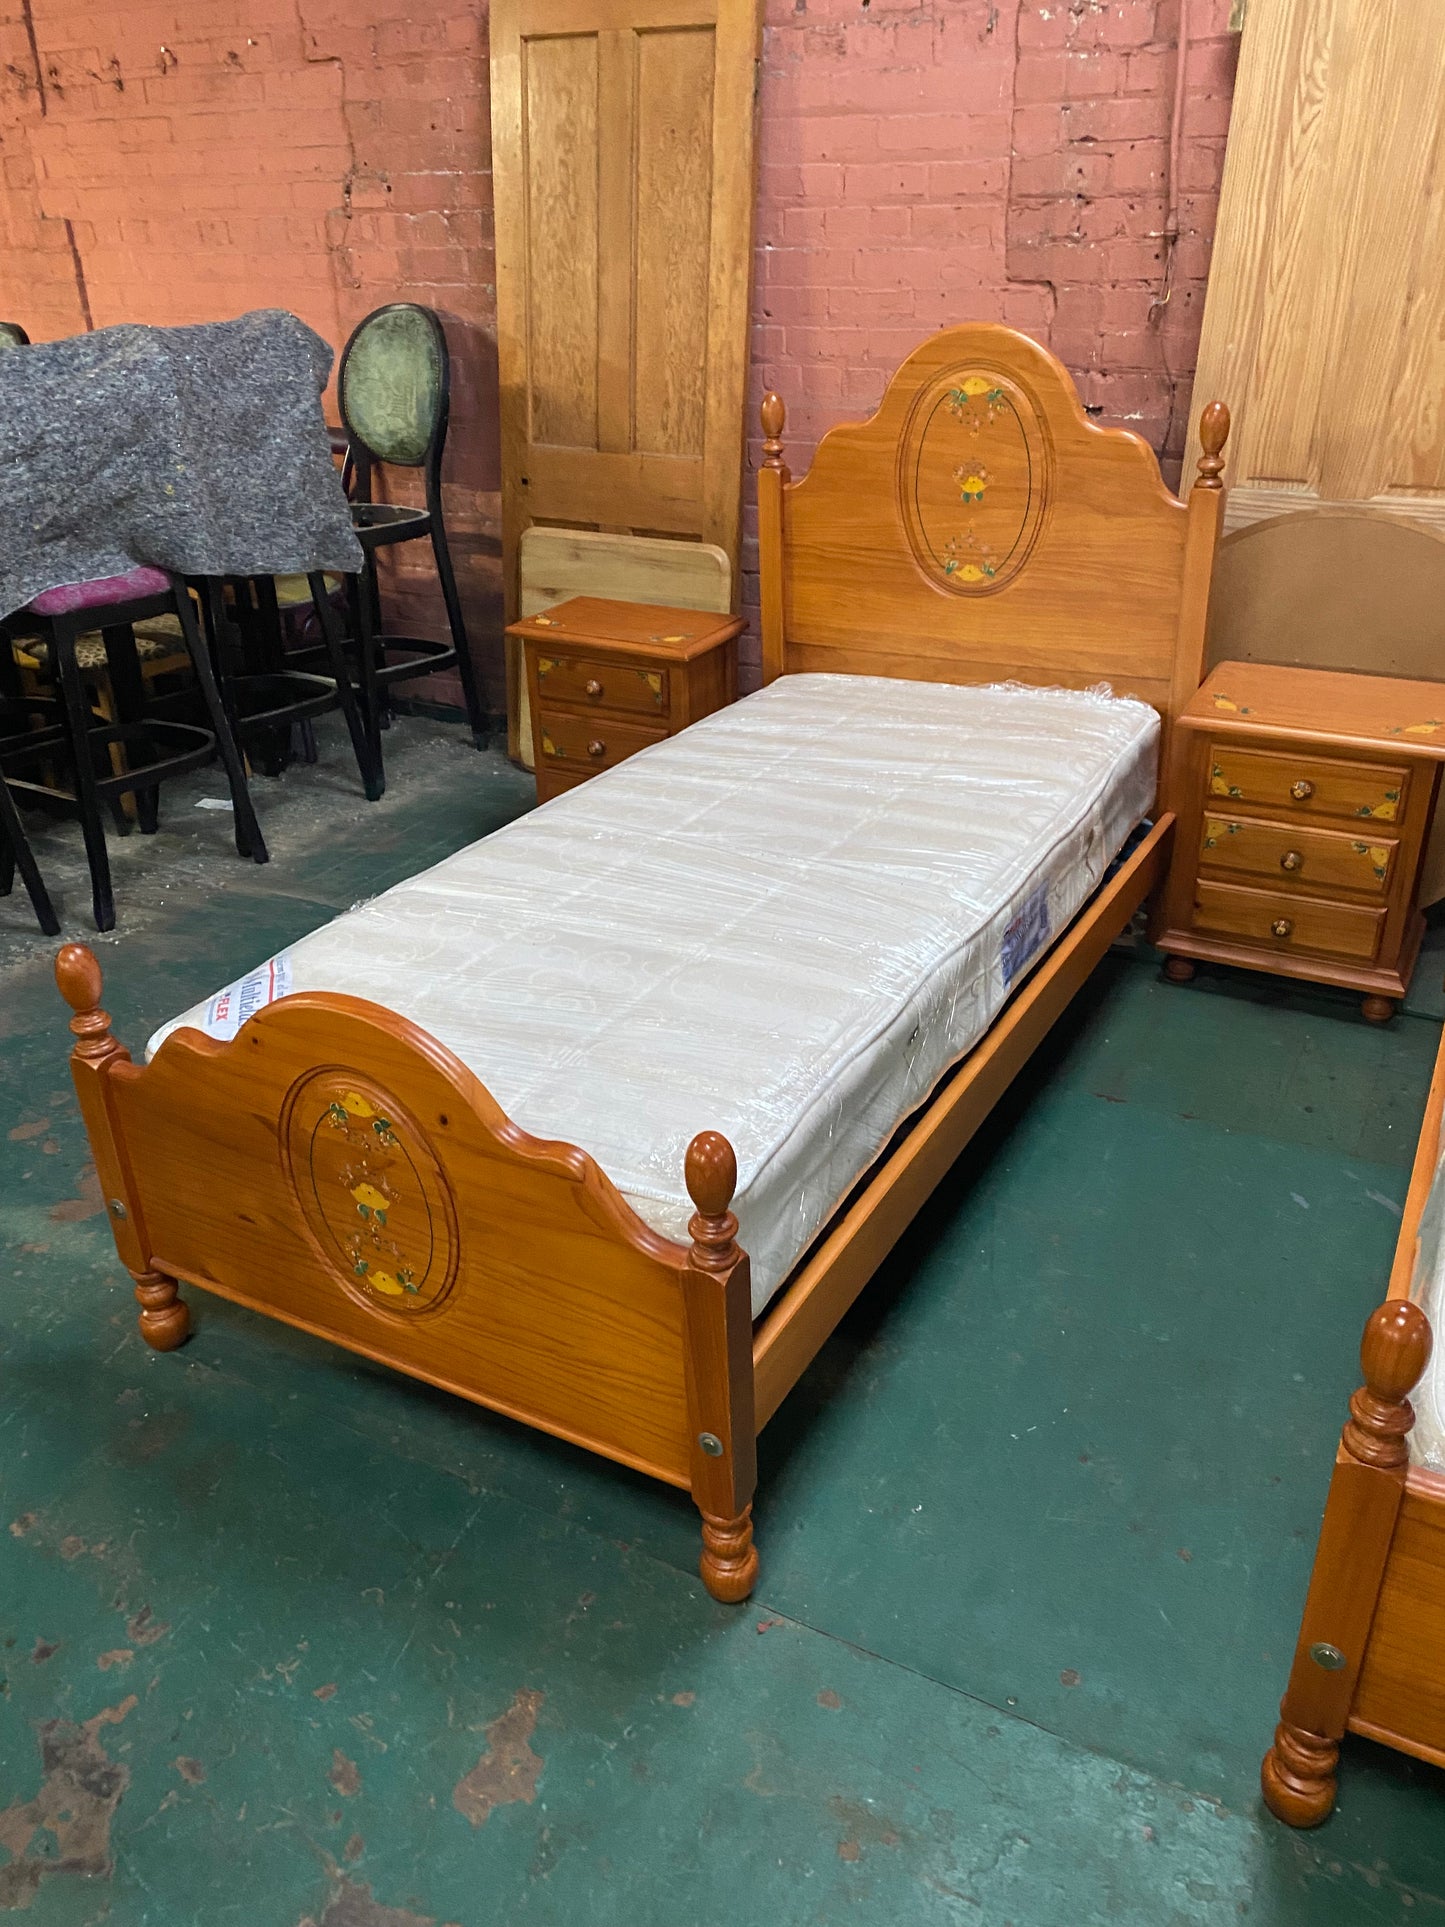 2 Beds and pair of Matching Bedside Cabinets